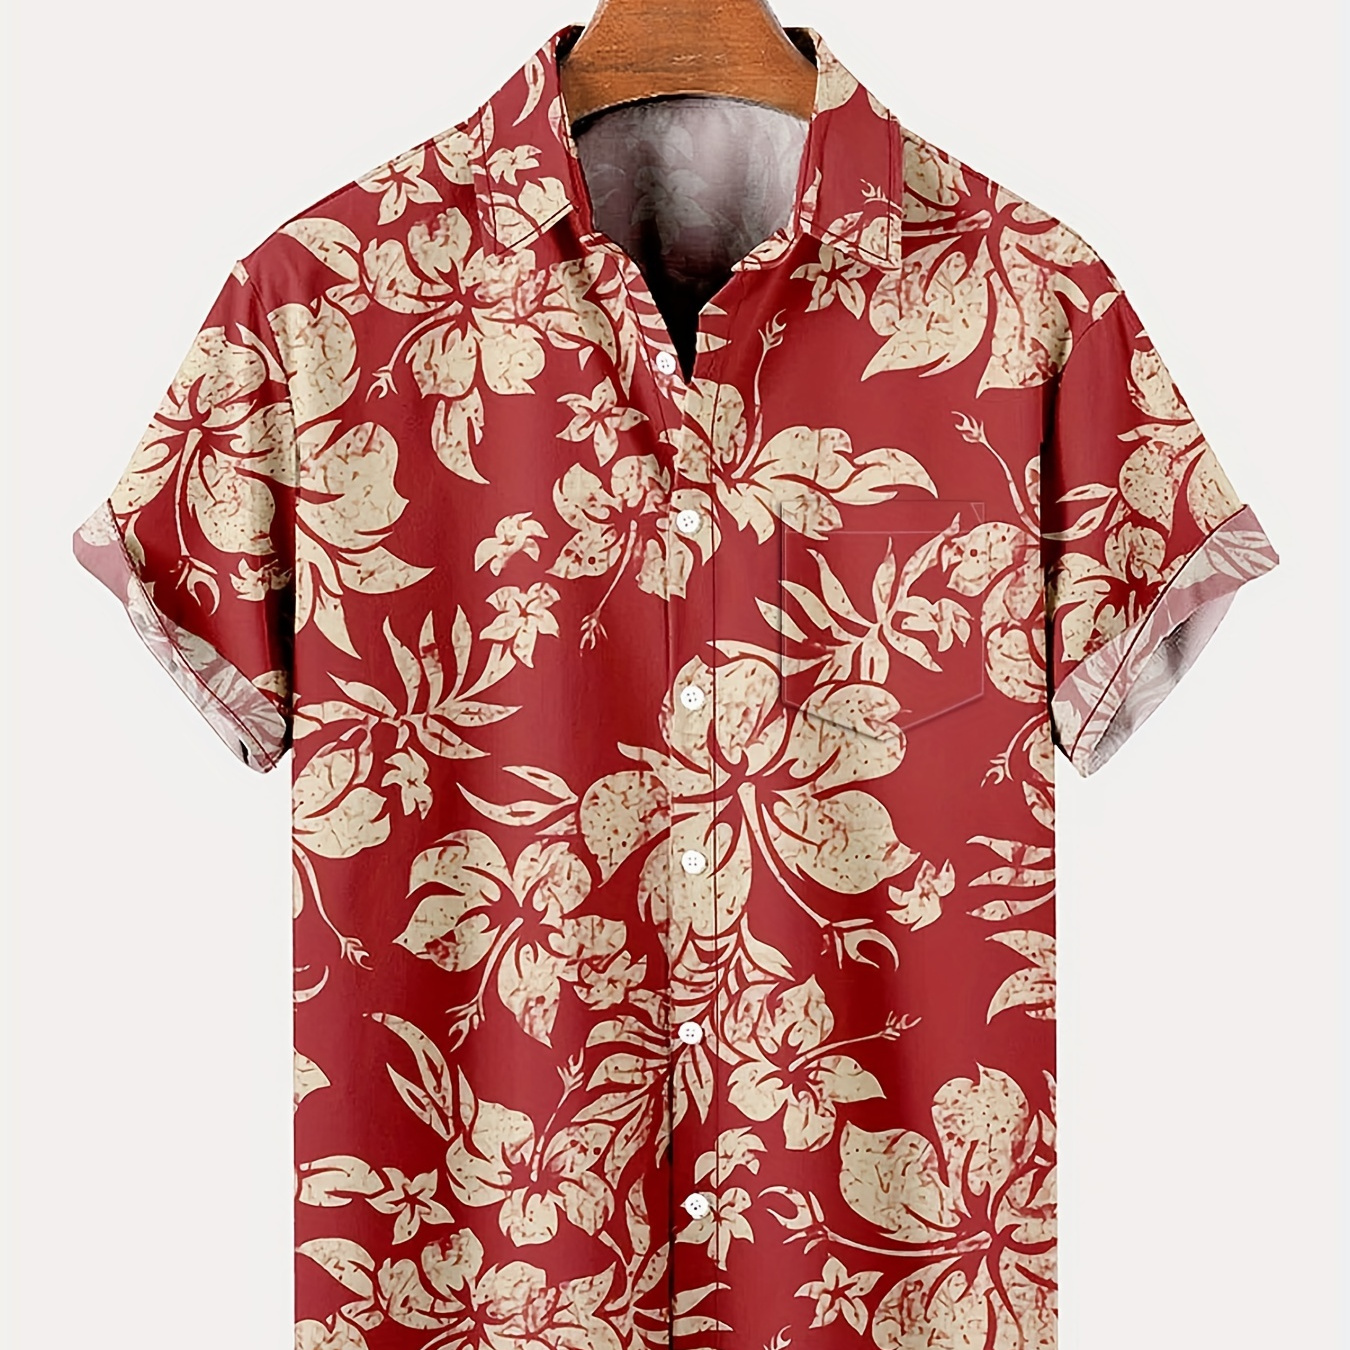 

Plus Size Men's Hawaiian Shirts For Beach, Retro Floral Printed Short Sleeve Aloha Shirts, Oversized Casual Loose Tops For Summer